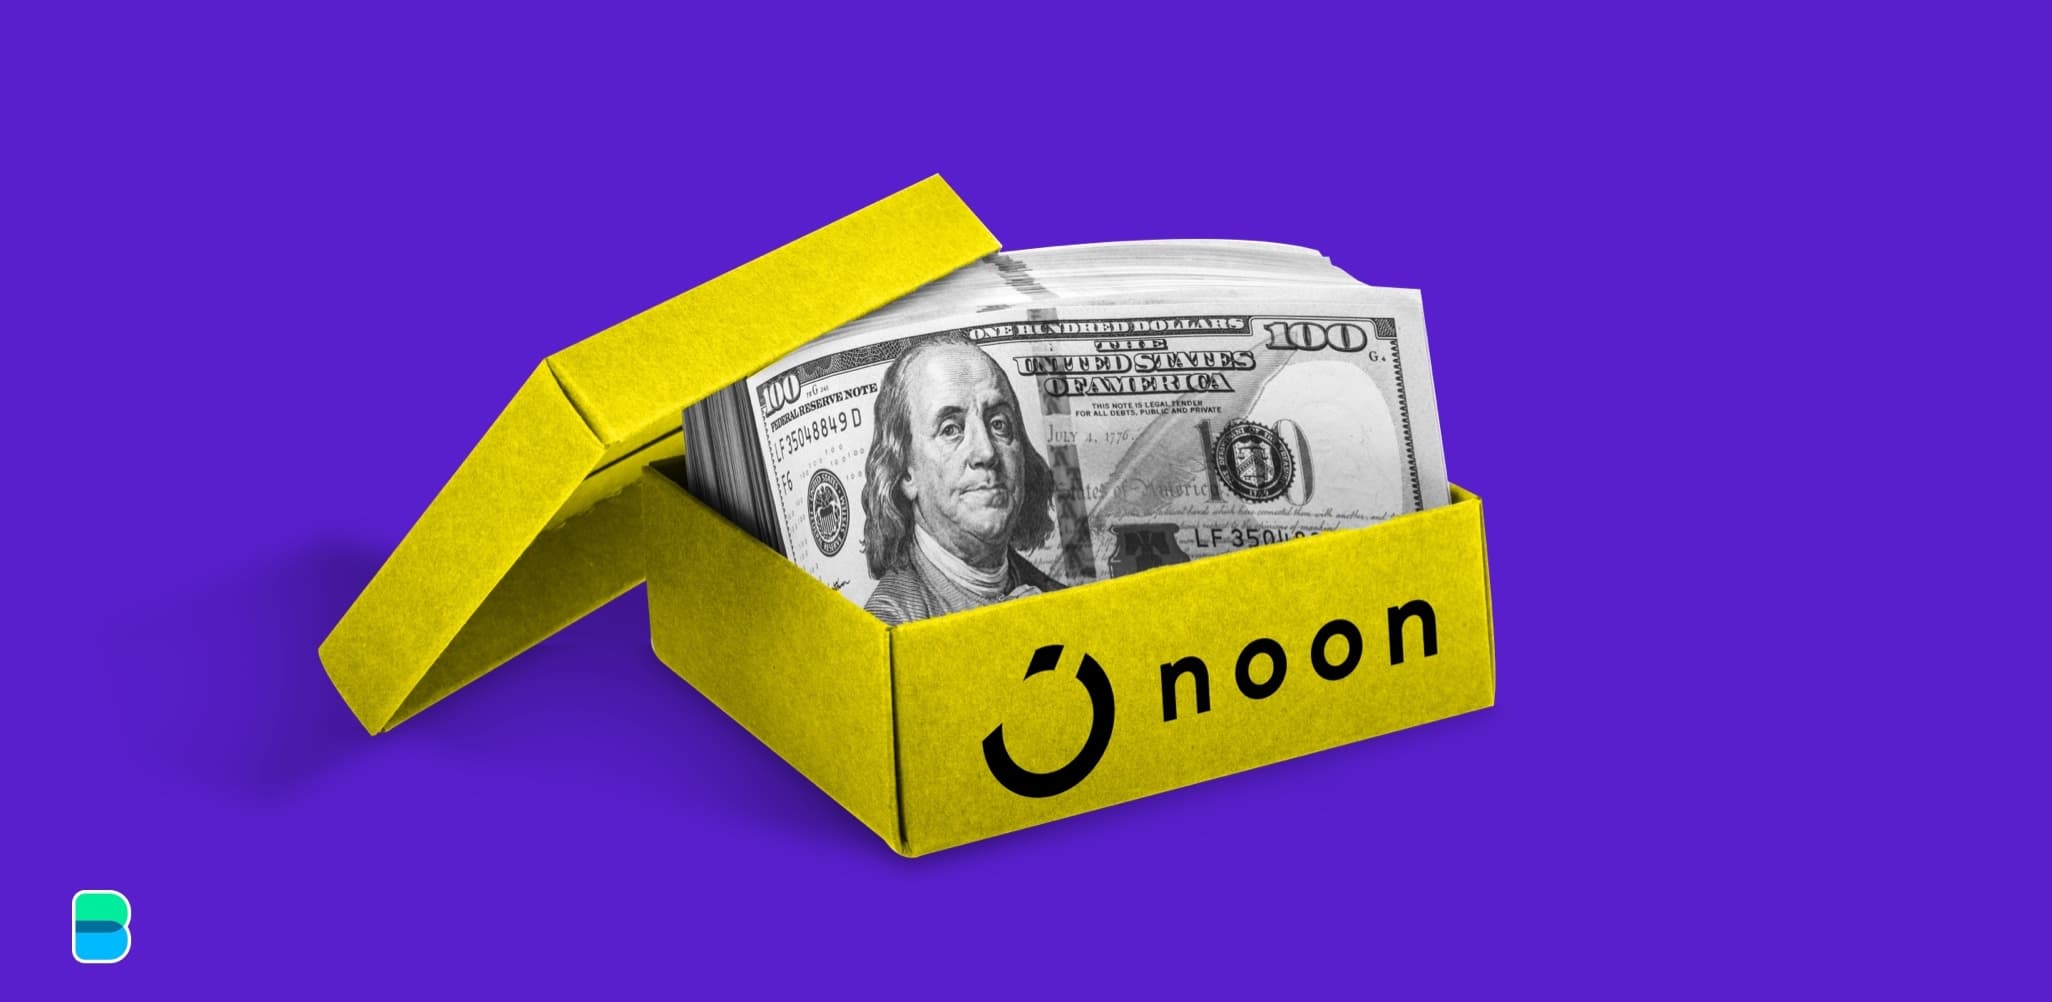 Noon is packing some serious funding&nbsp;